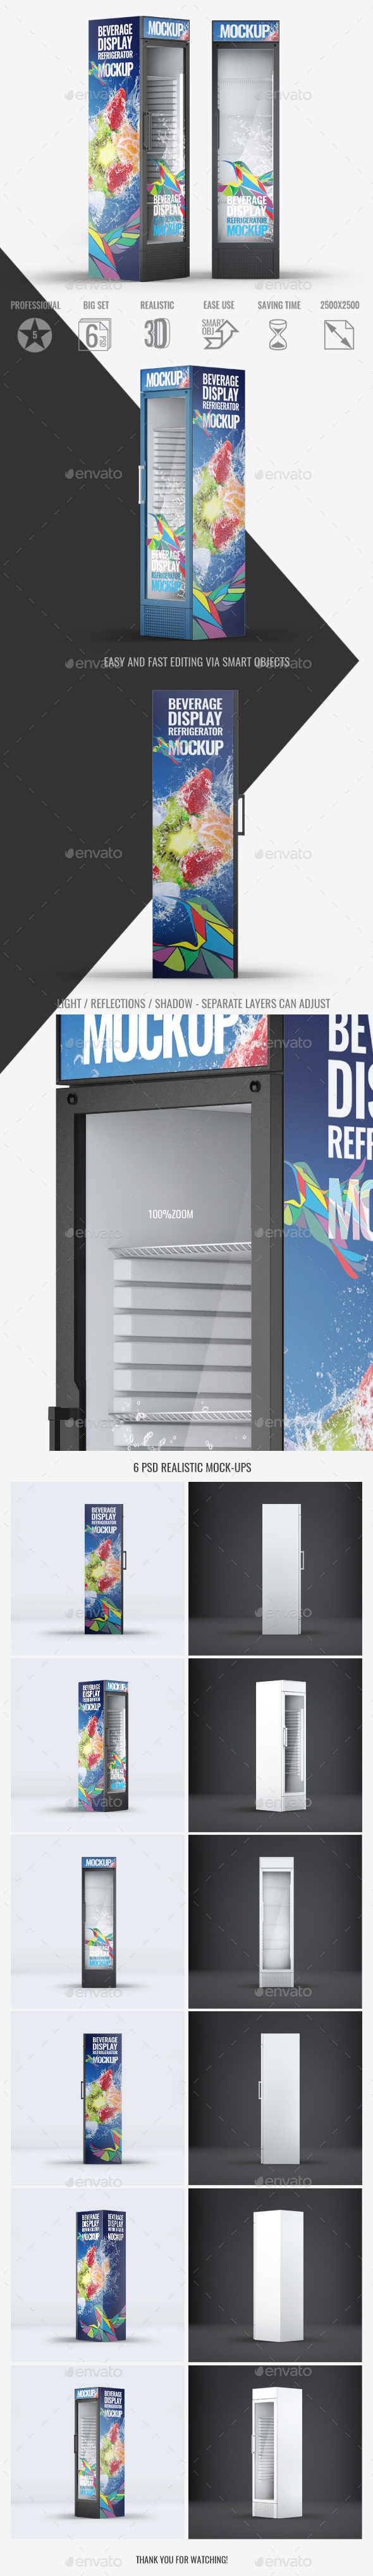 Download Fridge Mockup Graphics Designs Templates From Graphicriver